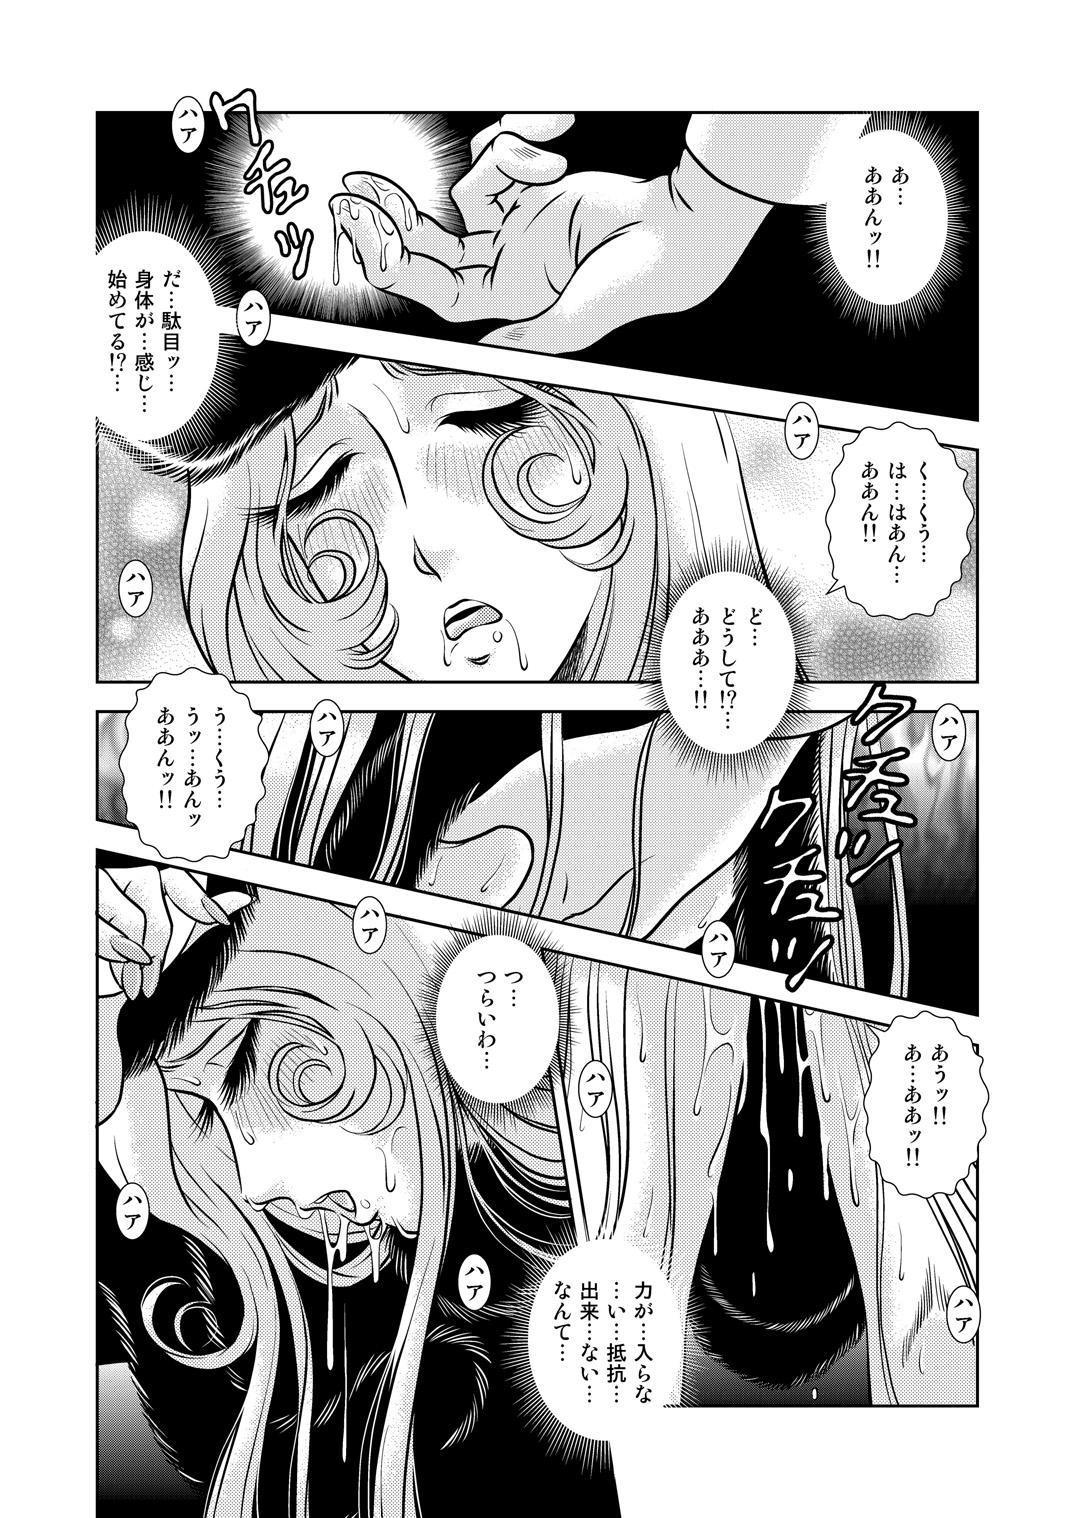 Jerking Off Chikan Tetsudou 999 - Galaxy express 999 Free Amateur - Page 6